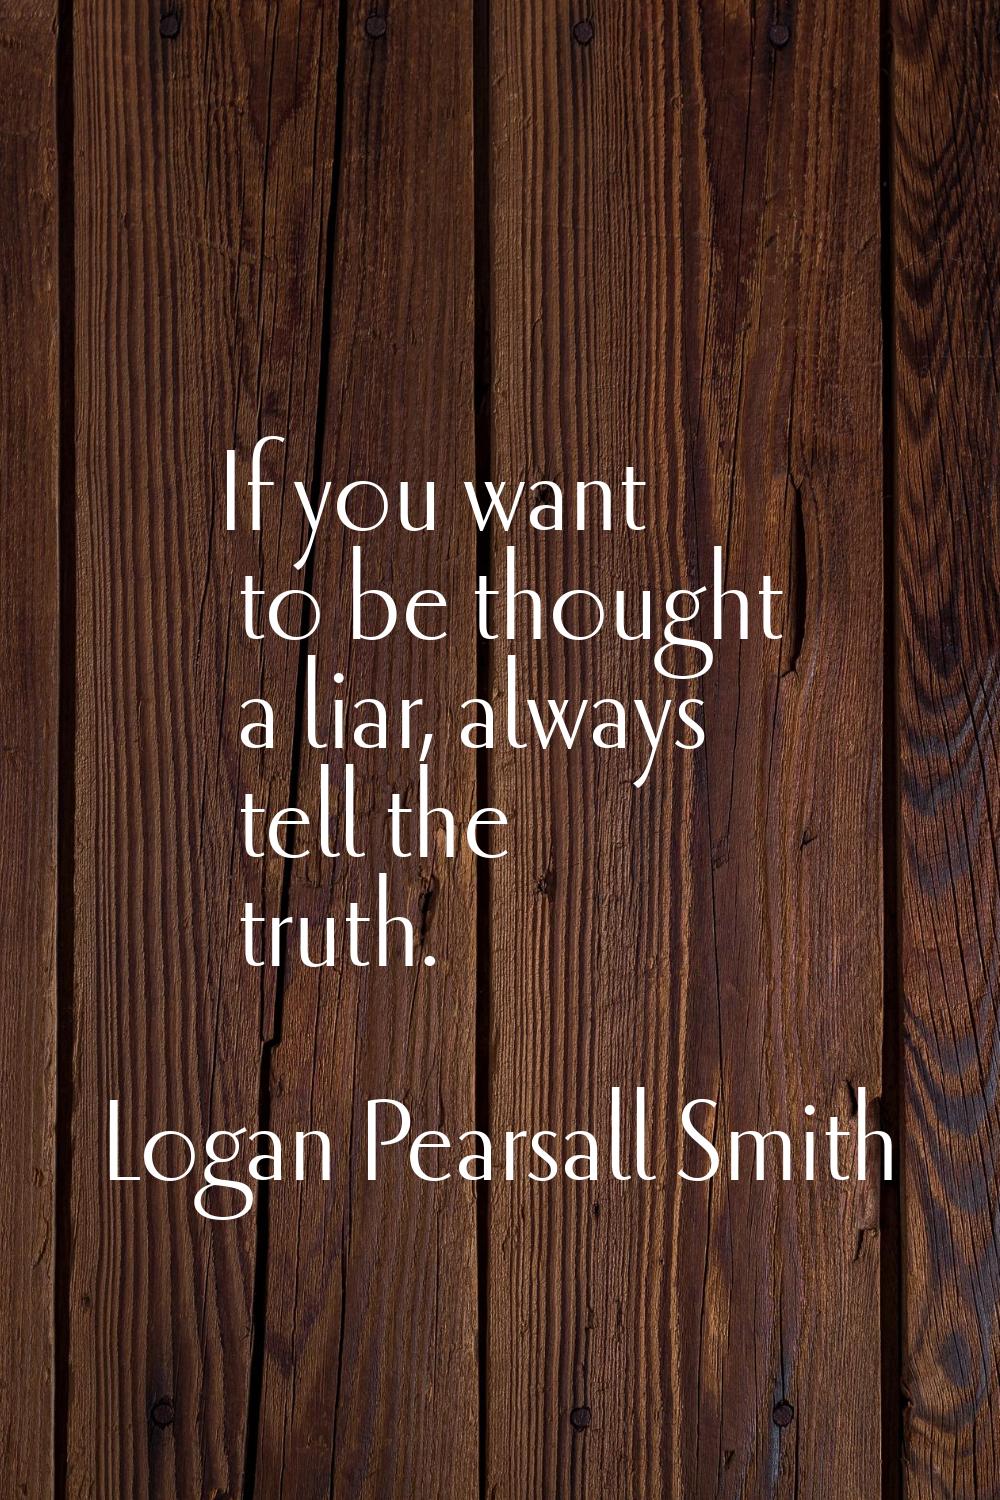 If you want to be thought a liar, always tell the truth.